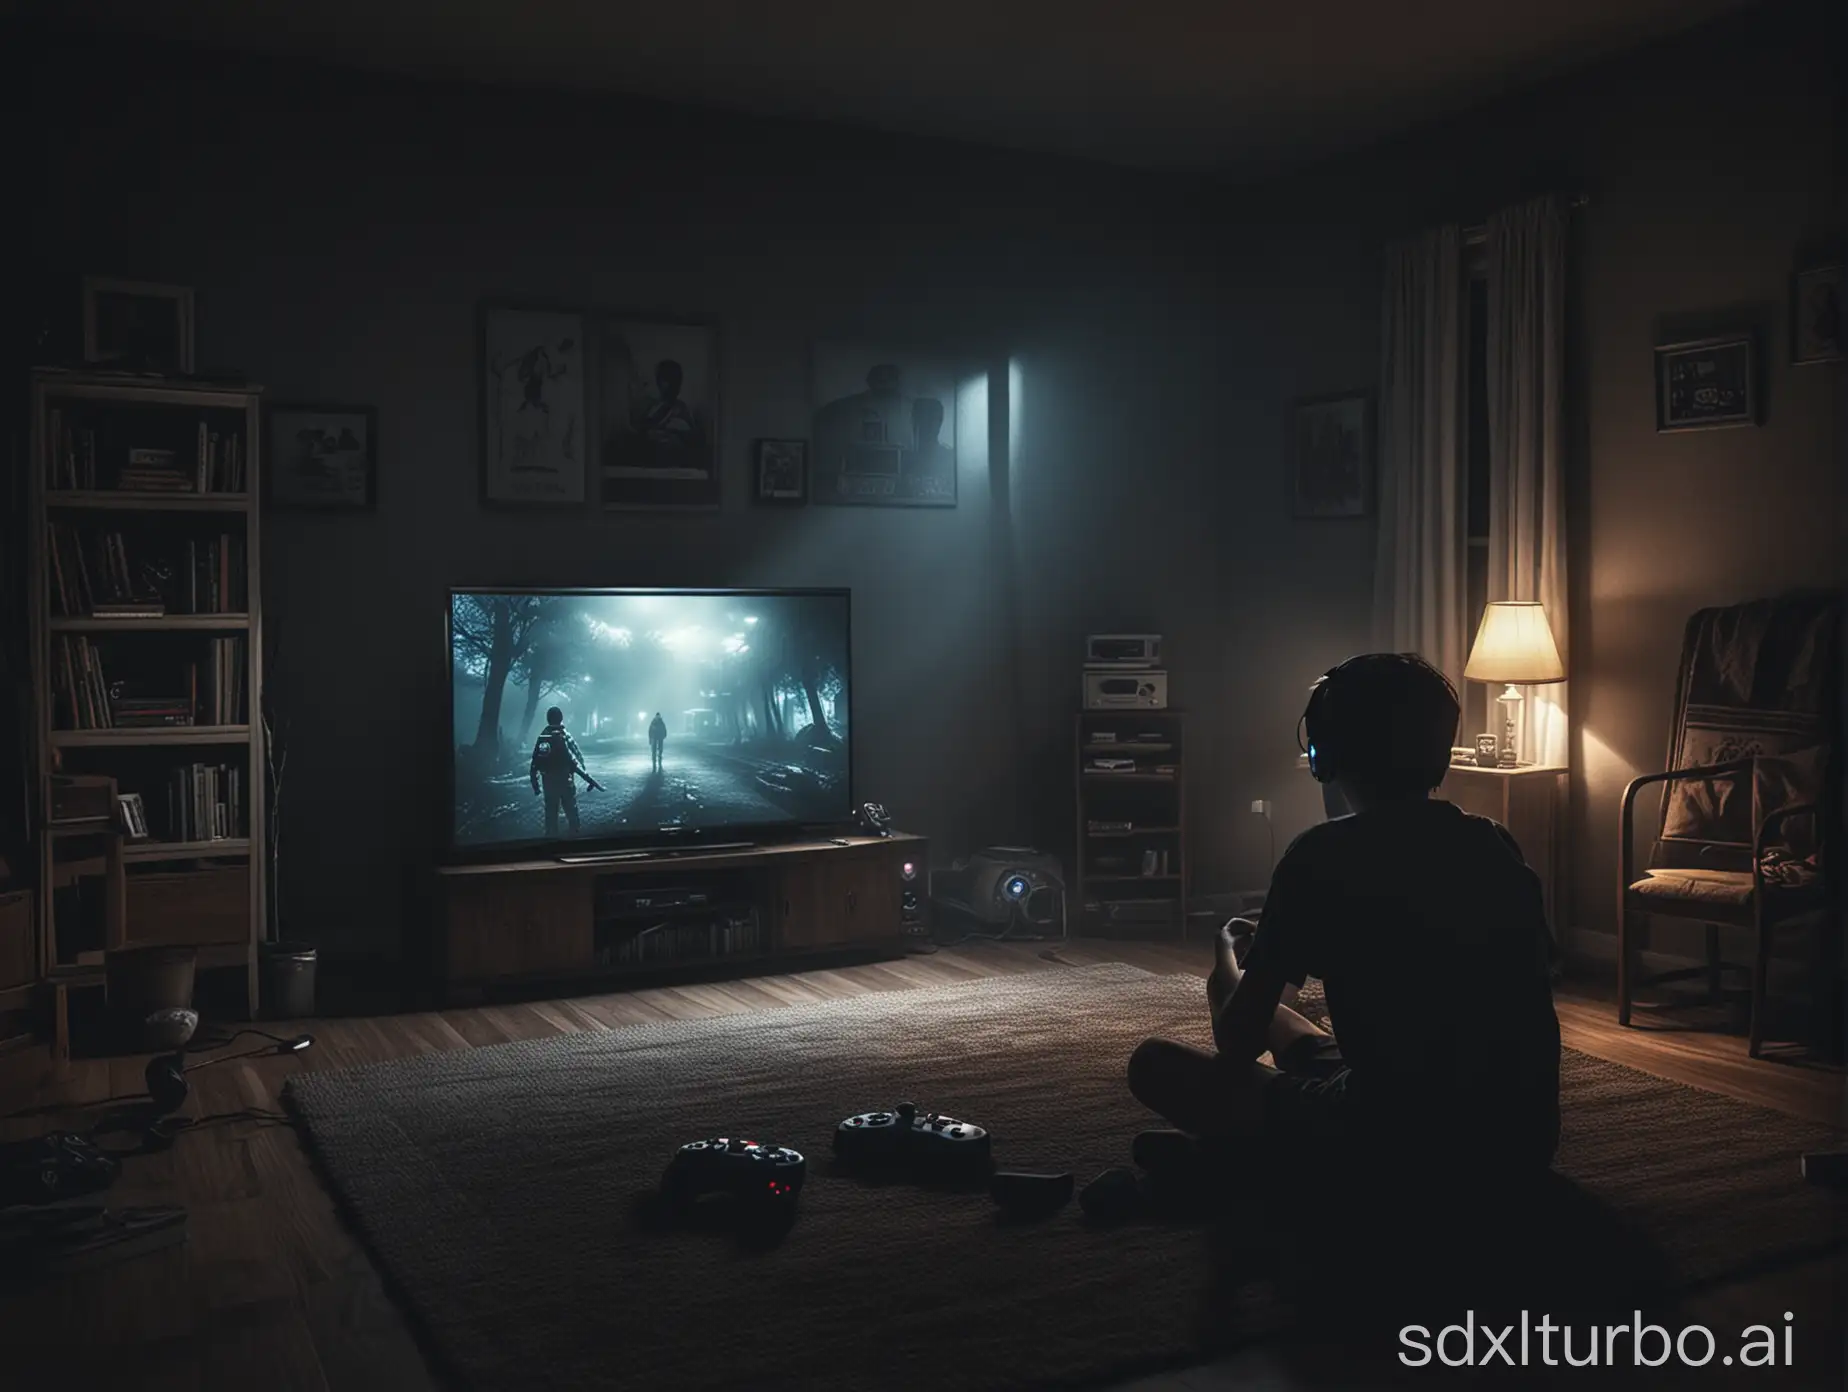 Create a high resolution, 16:9 aspect ratio, image about "true gaming scary stories". Show one boy playing videogames in the center of the picture, alone, in front of a tv, at night, dark room, menacing videogame, console, night lights, photorealistic, dark, sketchy, atmospheric, catchy, vibrant colors, must pop and catch attention. 